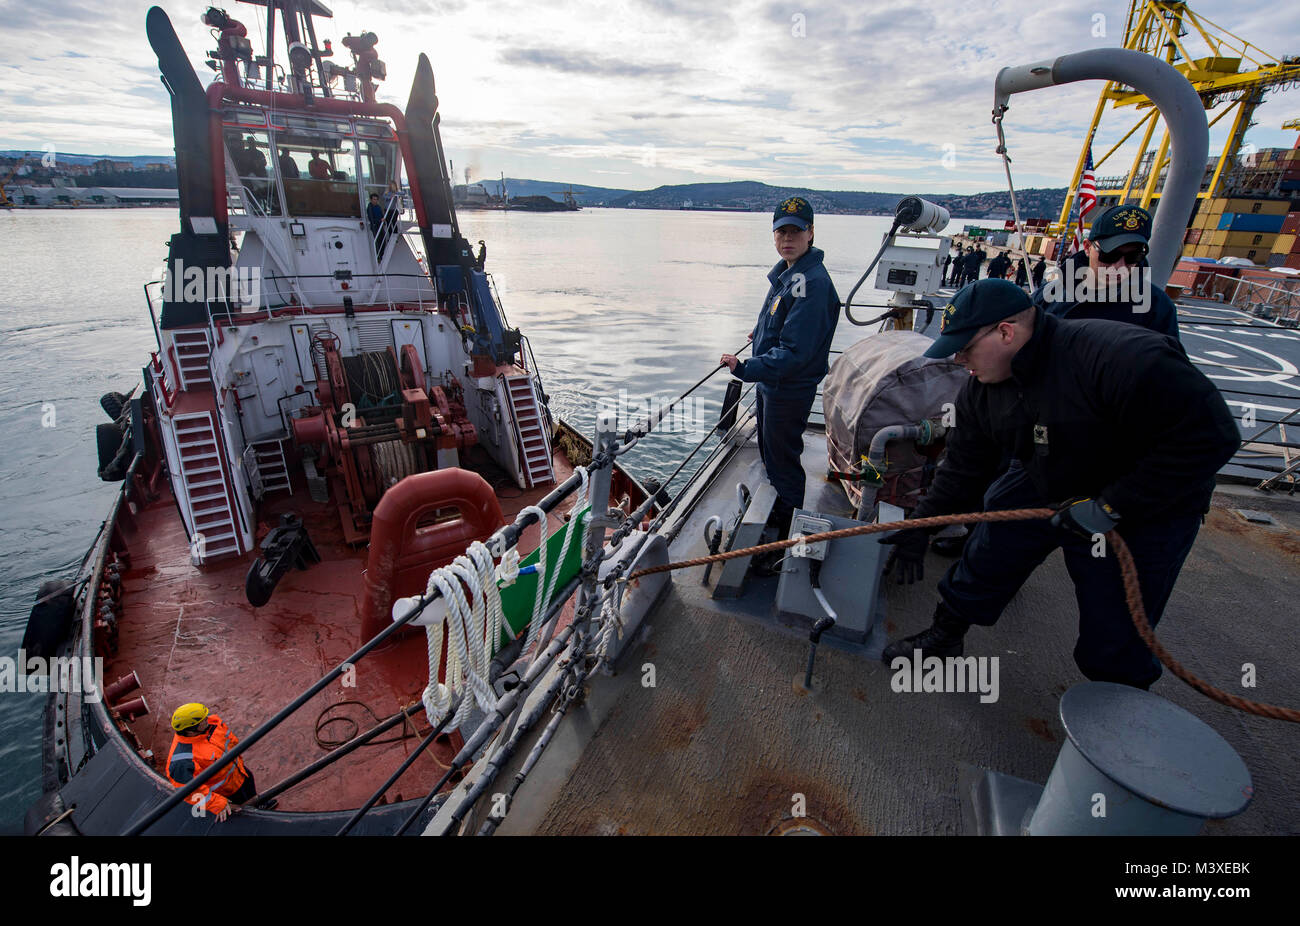 180204-N-RG482-052  TRIESTE, Italy (Feb. 4, 2018) Sailors aboard the Arleigh Burke-class guided-missile destroyer USS Ross (DDG 71) haul line aboard the ship while departing Trieste, Italy. Ross, forward-deployed to Rota, Spain, is on its sixth patrol in the U.S. 6th Fleet area of operations in support of regional allies and partners and U.S. national security interests in Europe. (U.S. Navy photo by Mass Communication Specialist 1st Class Kyle Steckler/Released) Stock Photo